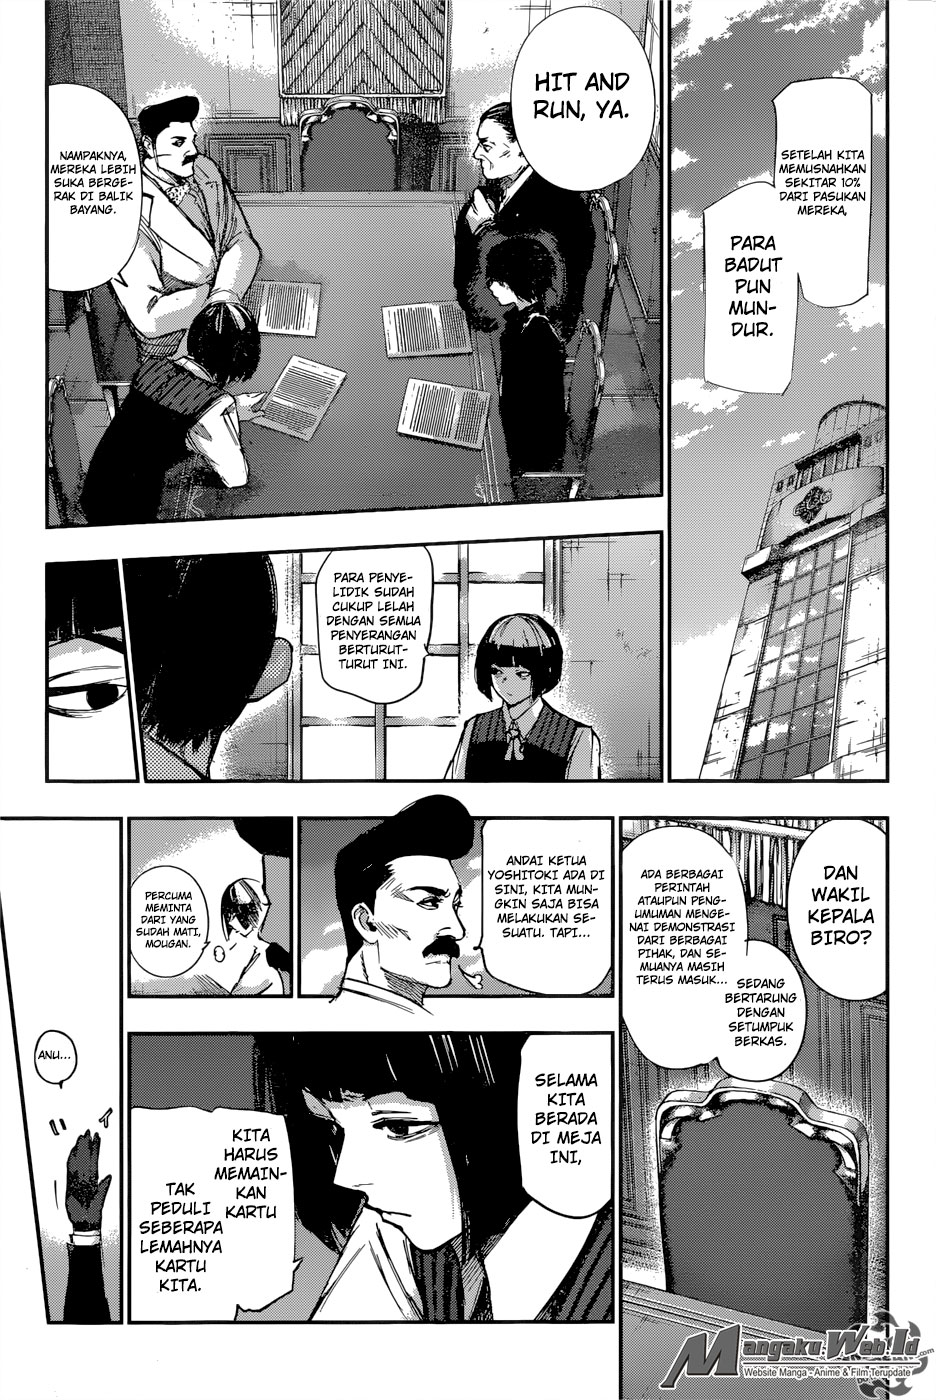 Tokyo Ghoul:re Chapter 103